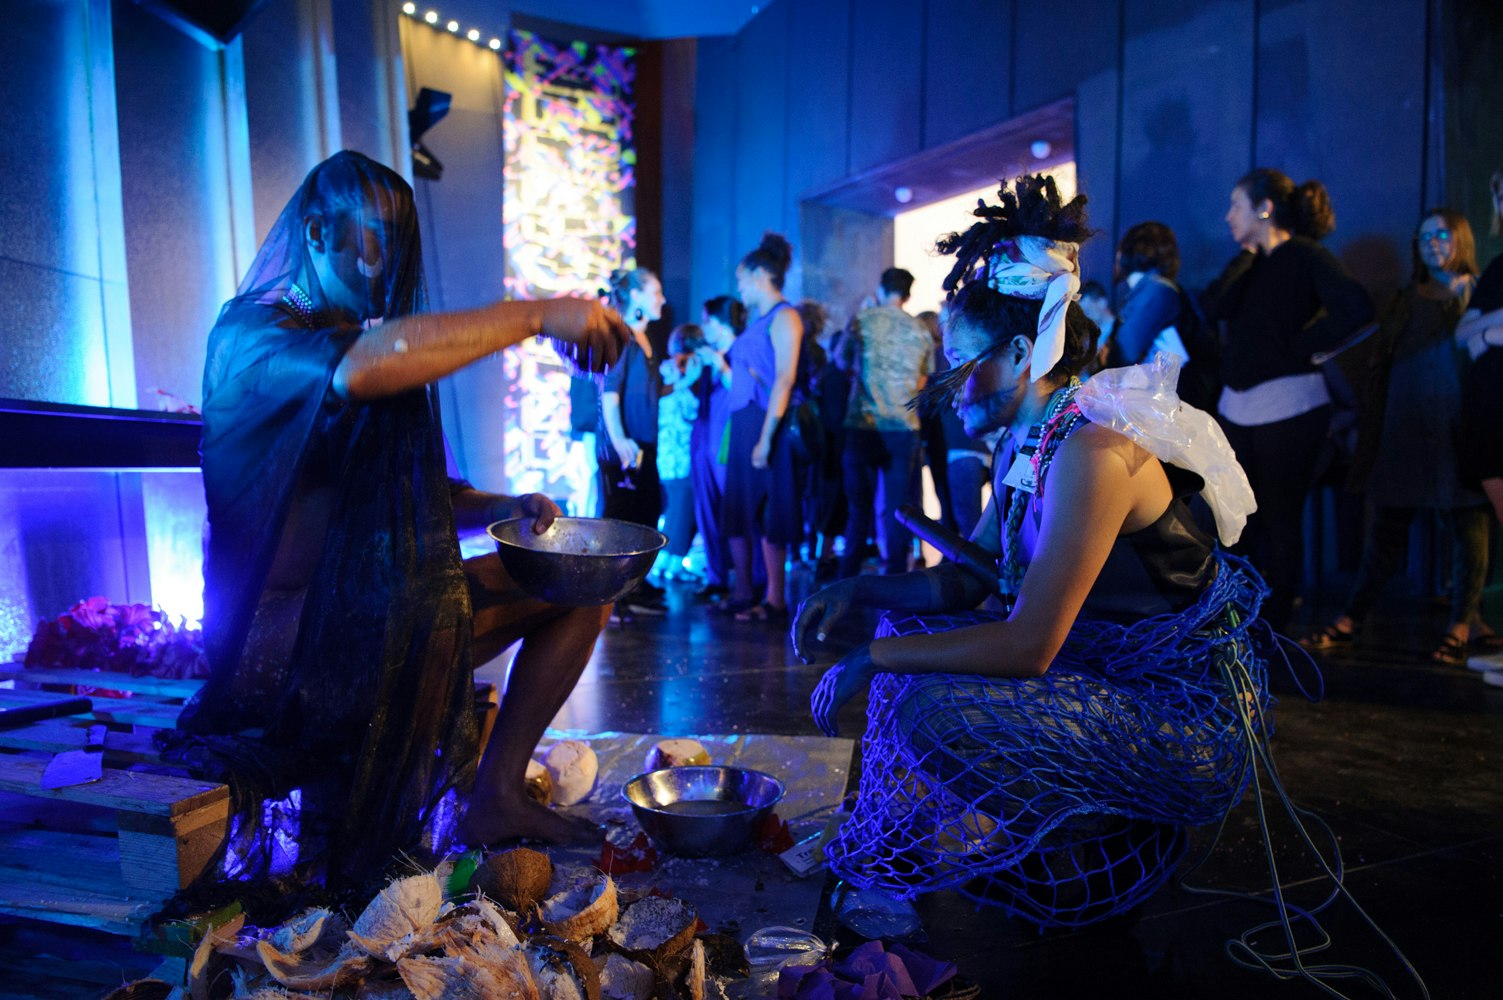 Two artists draped in ocean debris, netting and mesh sit facing each other in a blue-lit room.